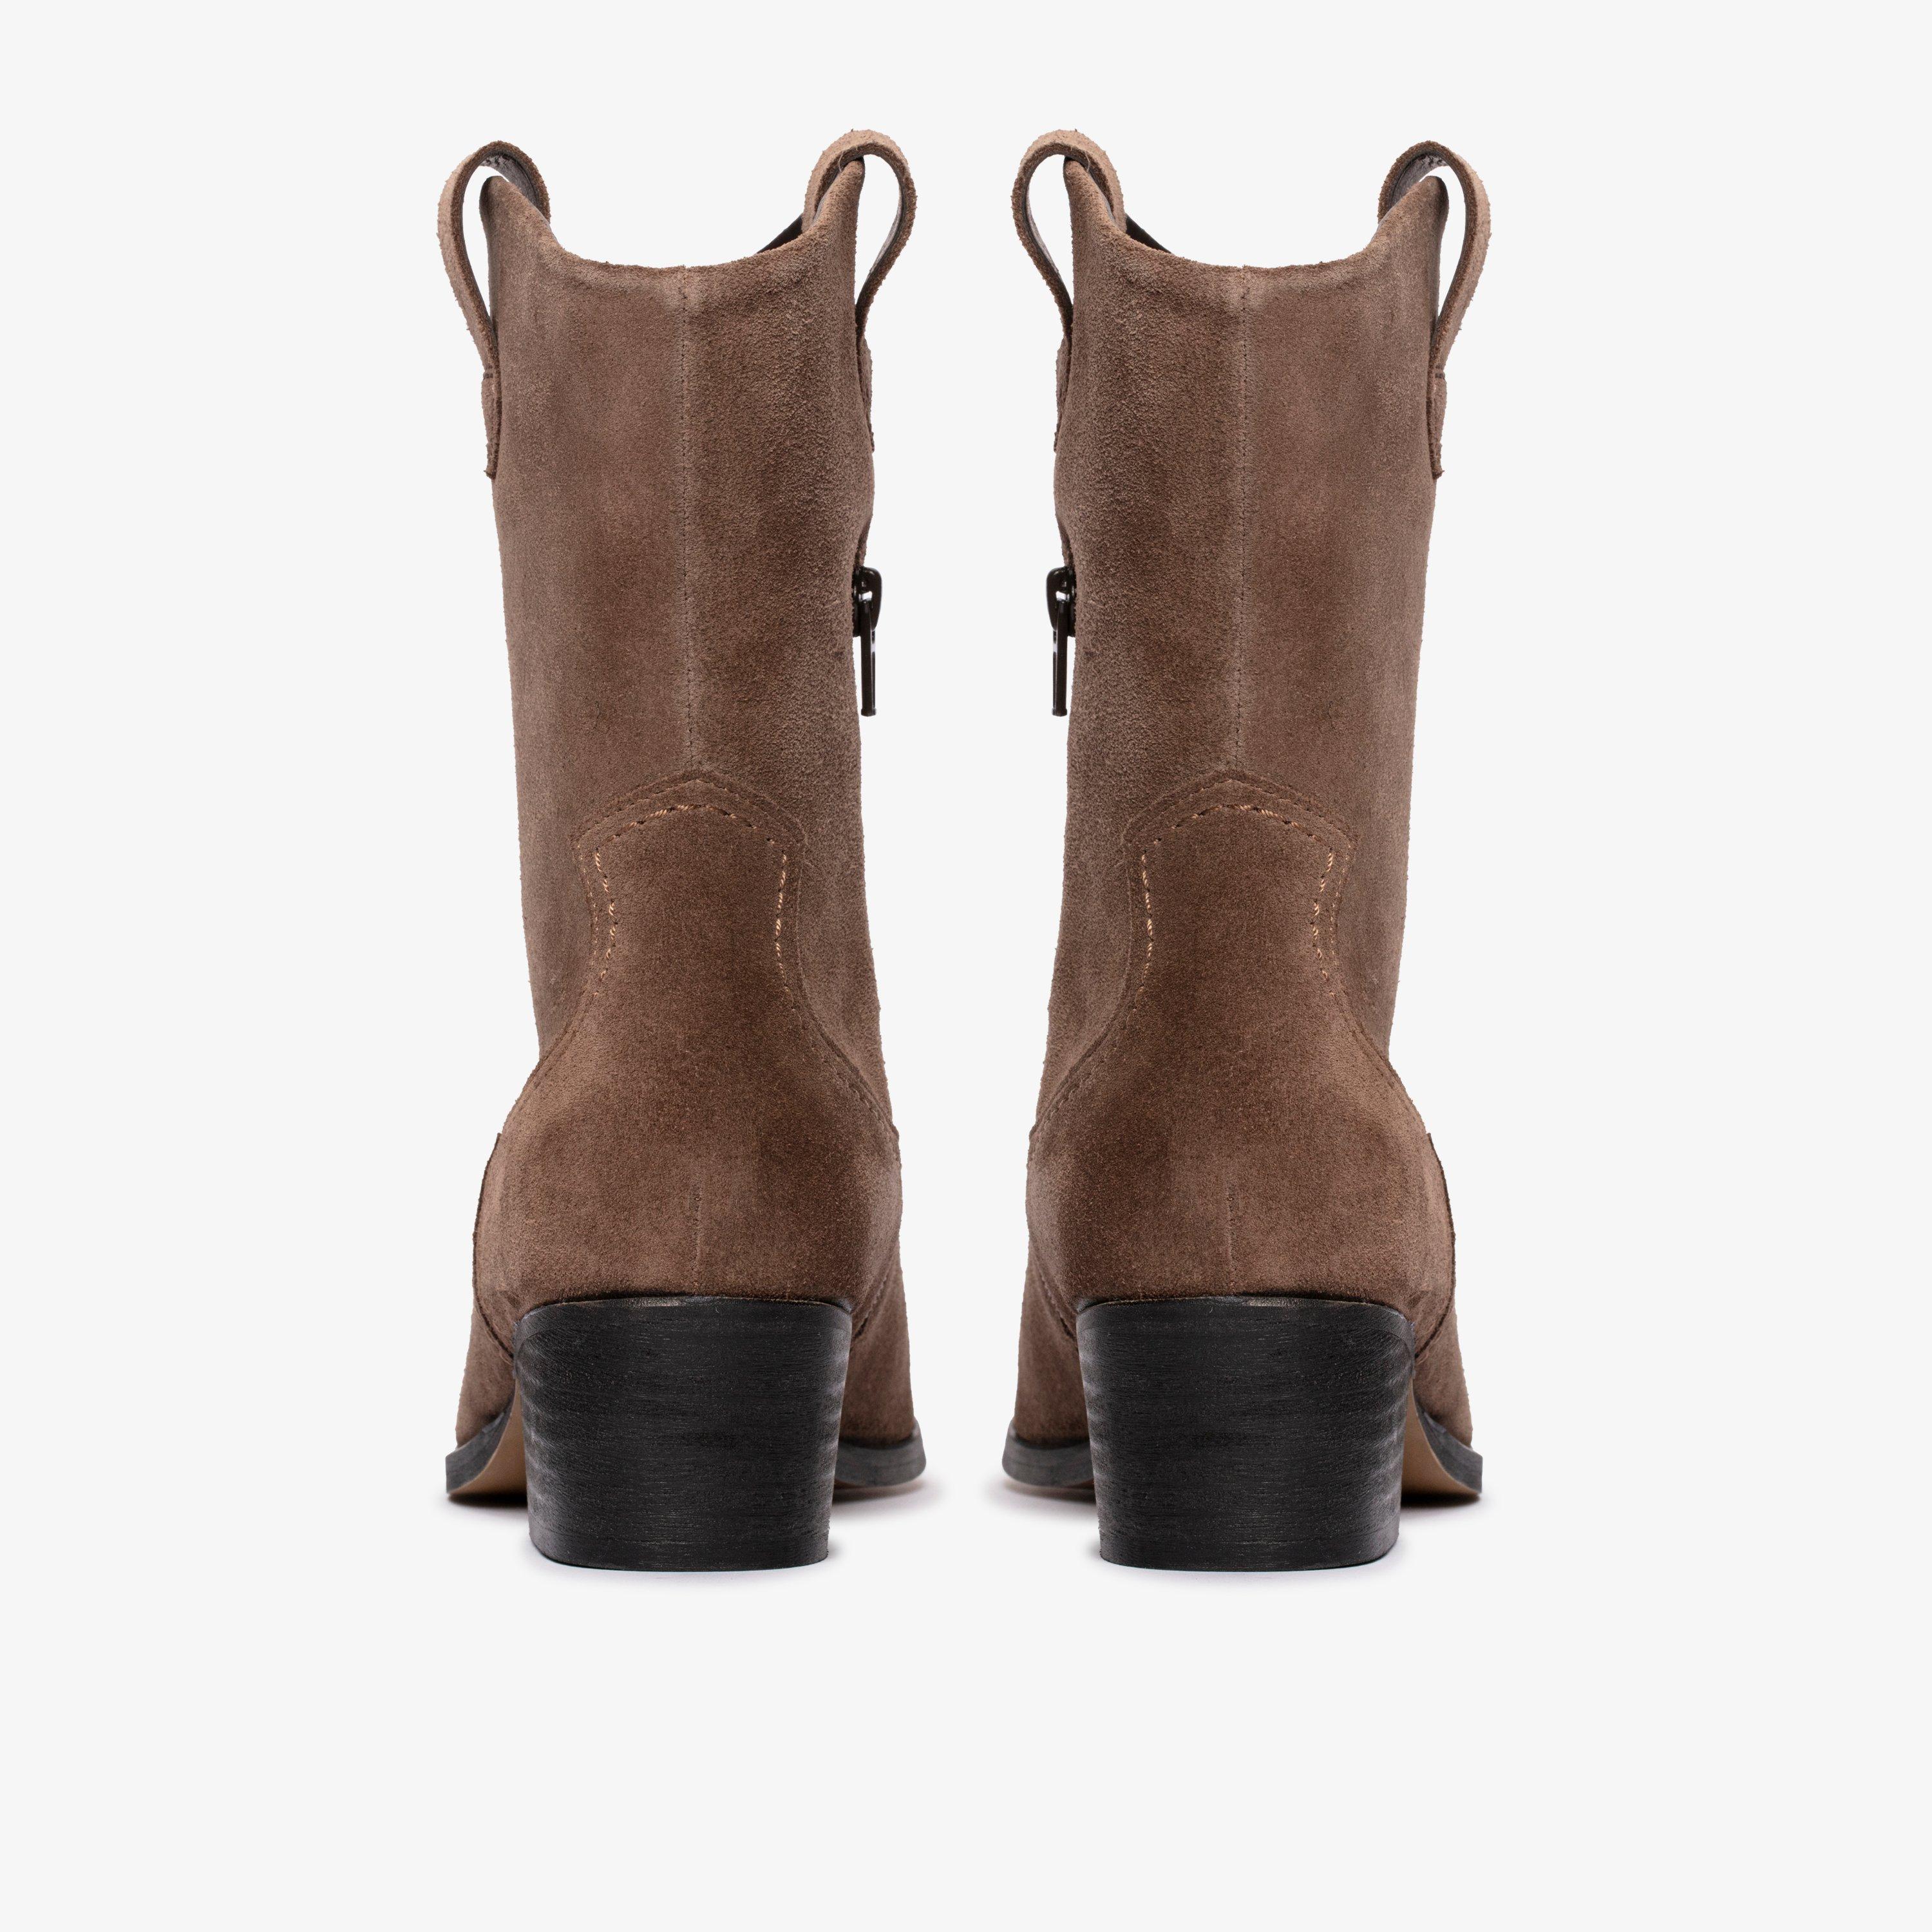 Womens Boots & Booties - Ankle & Knee High Boots | Clarks US